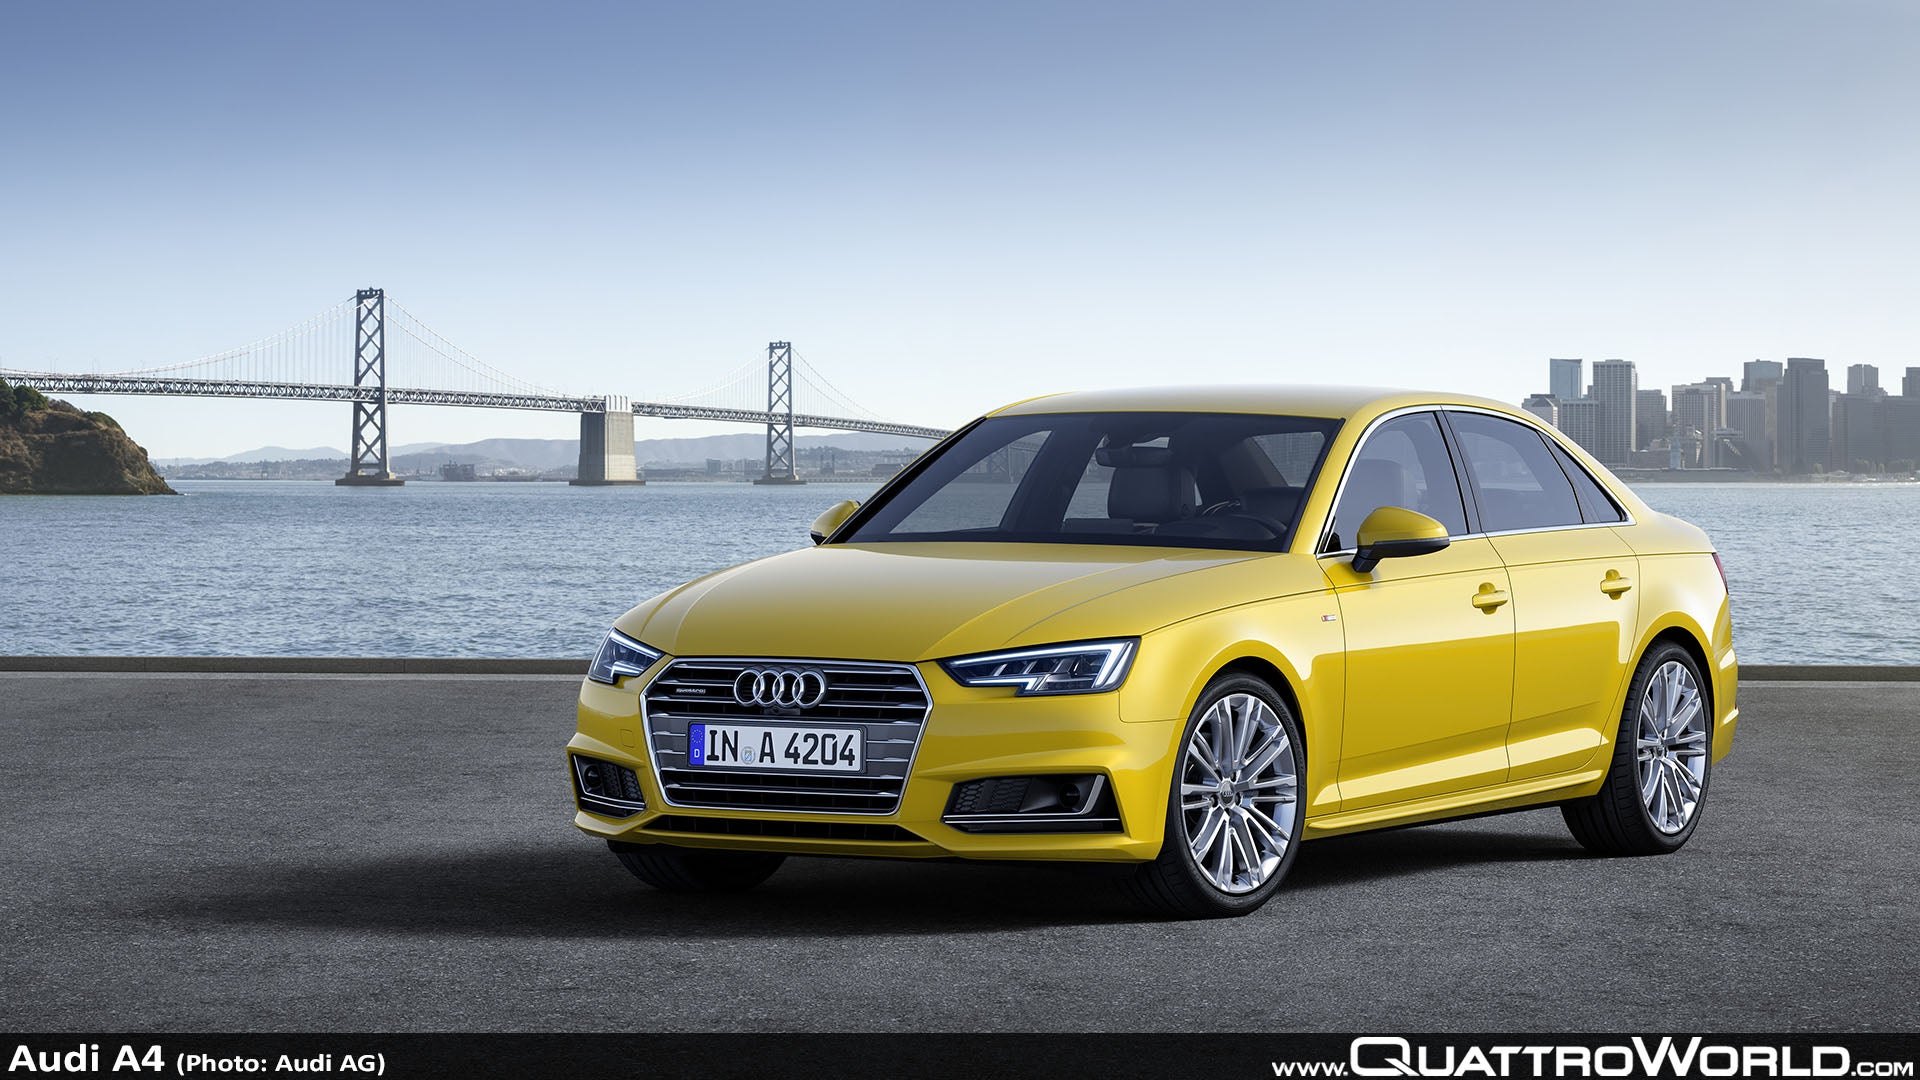 High tech all the way – the new Audi A4 and A4 Avant - QuattroWorld